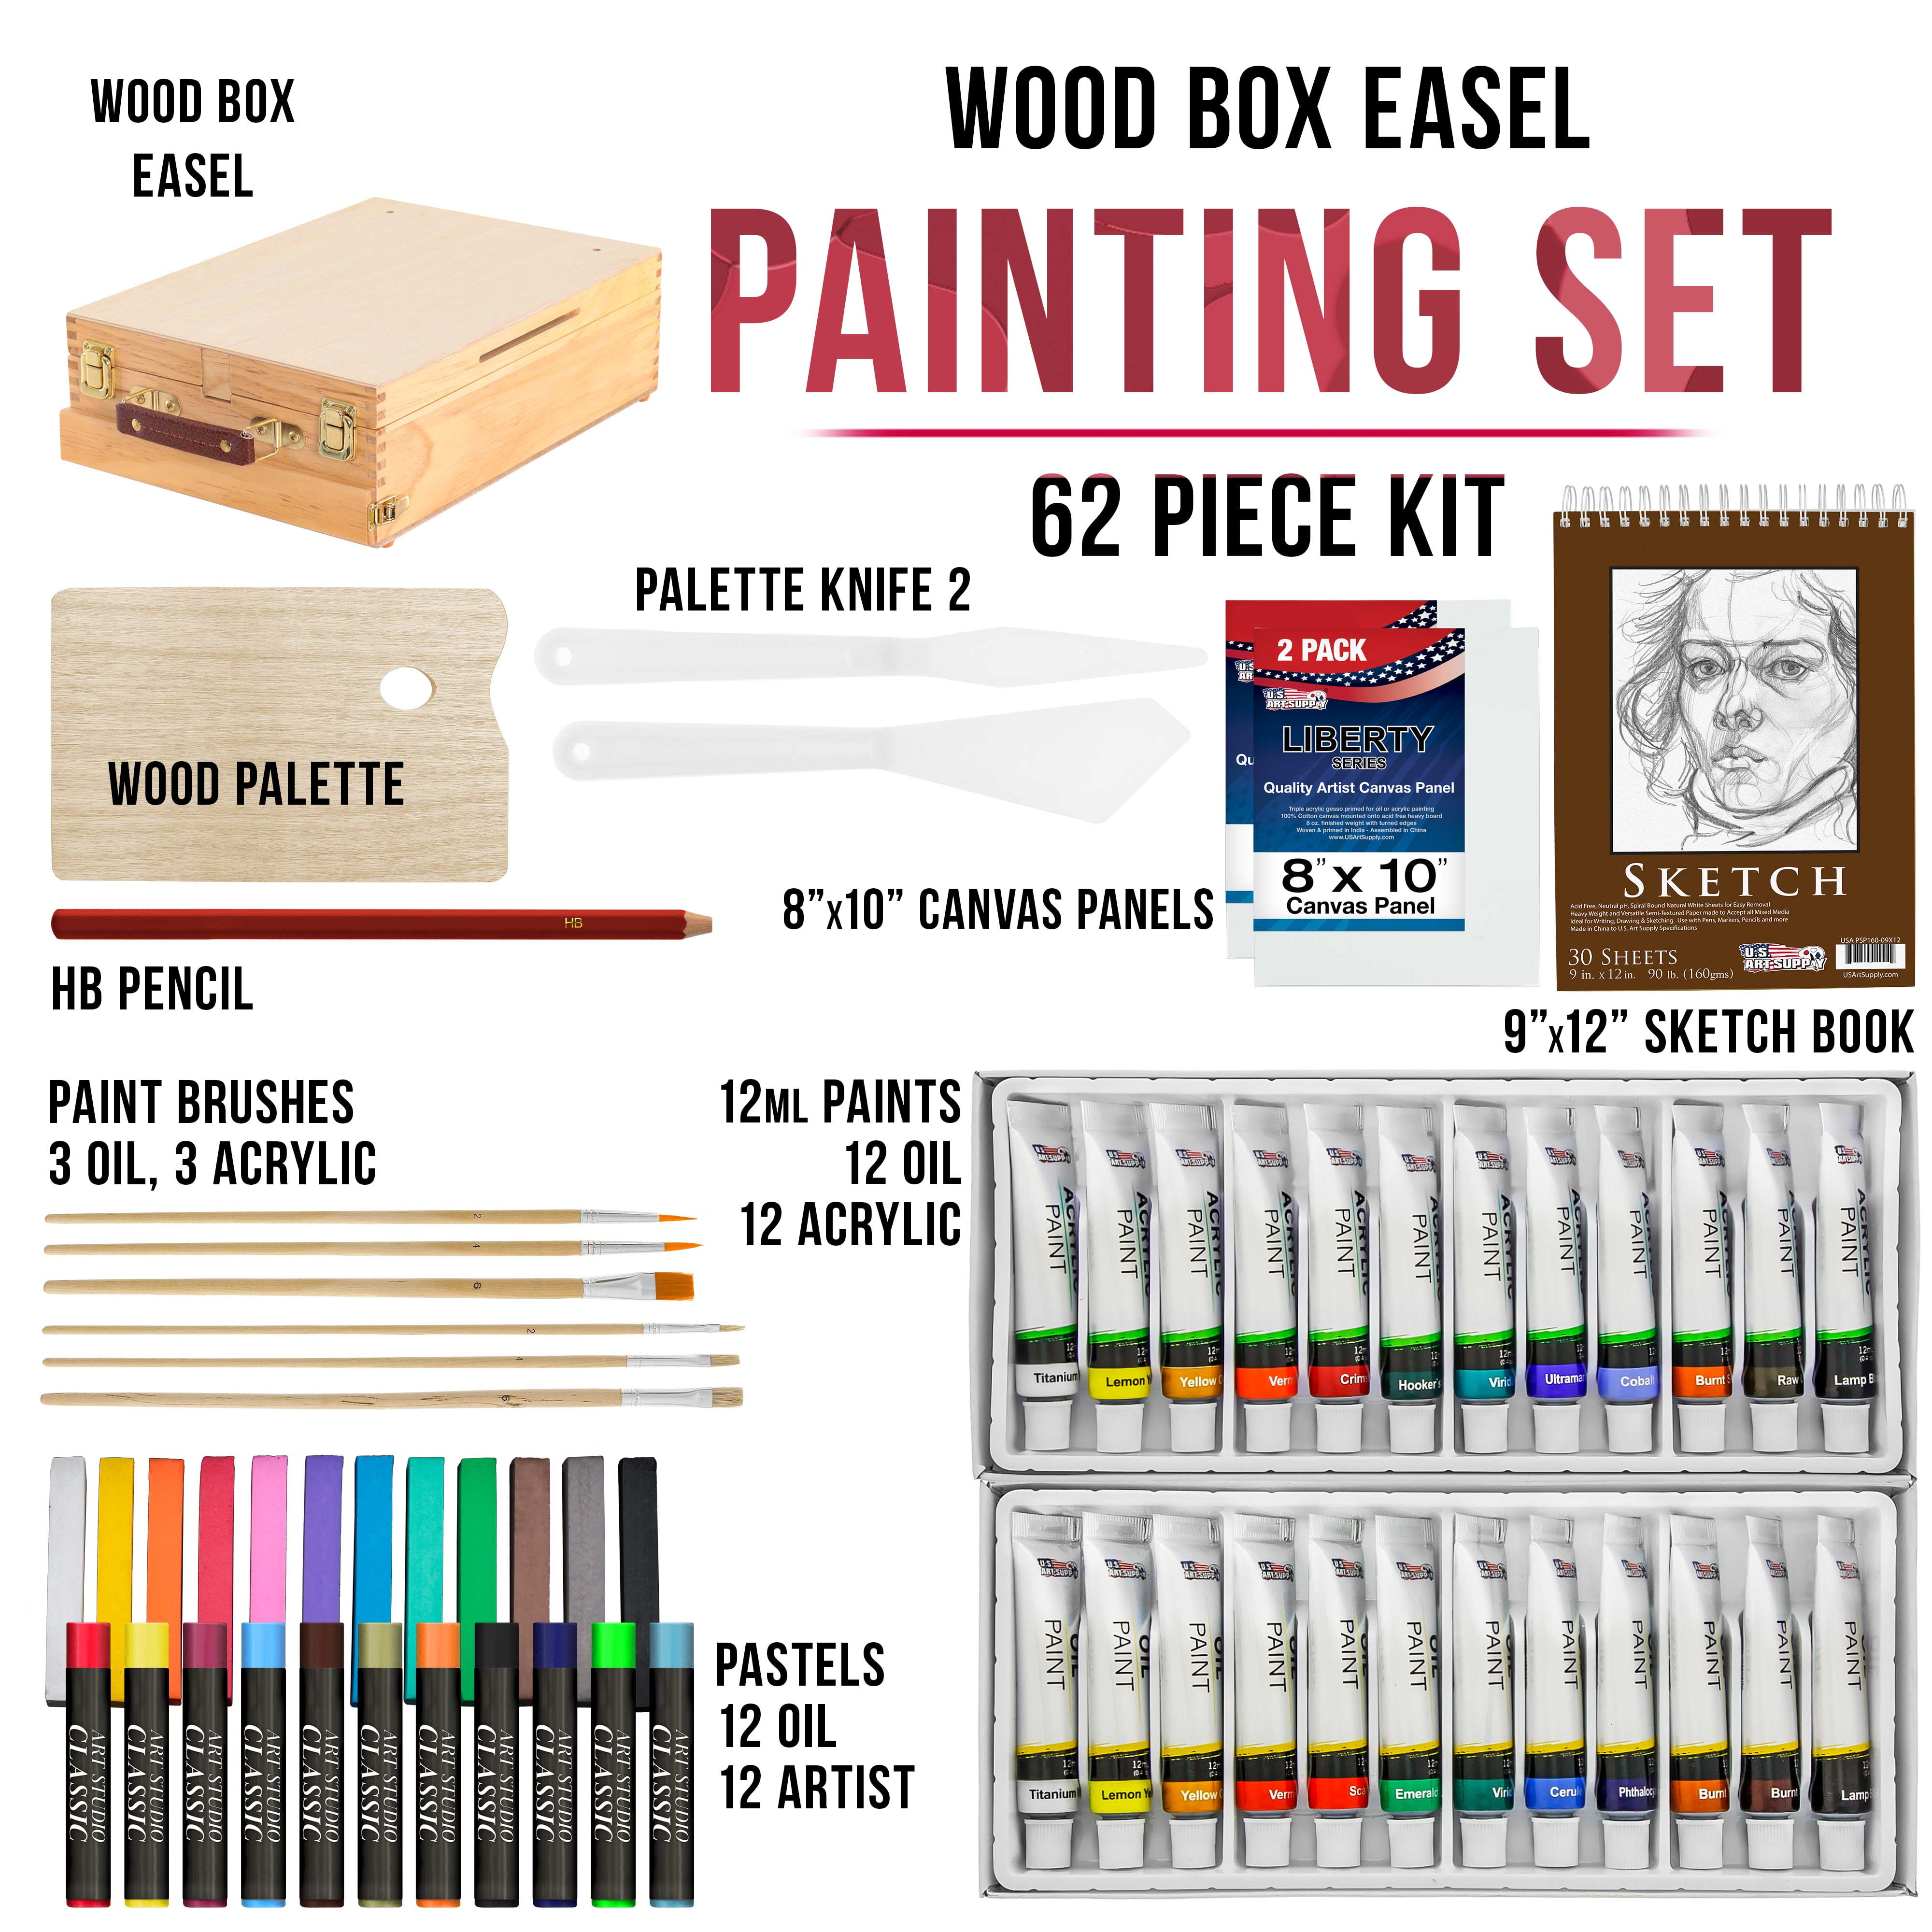 U.S. Art Supply Paint and Sip Art Party Painting Kit - 6 Easels, 12 Paint Tube Set, 12 Canvas Panels, 6 Brush Sets & 6 Aprons